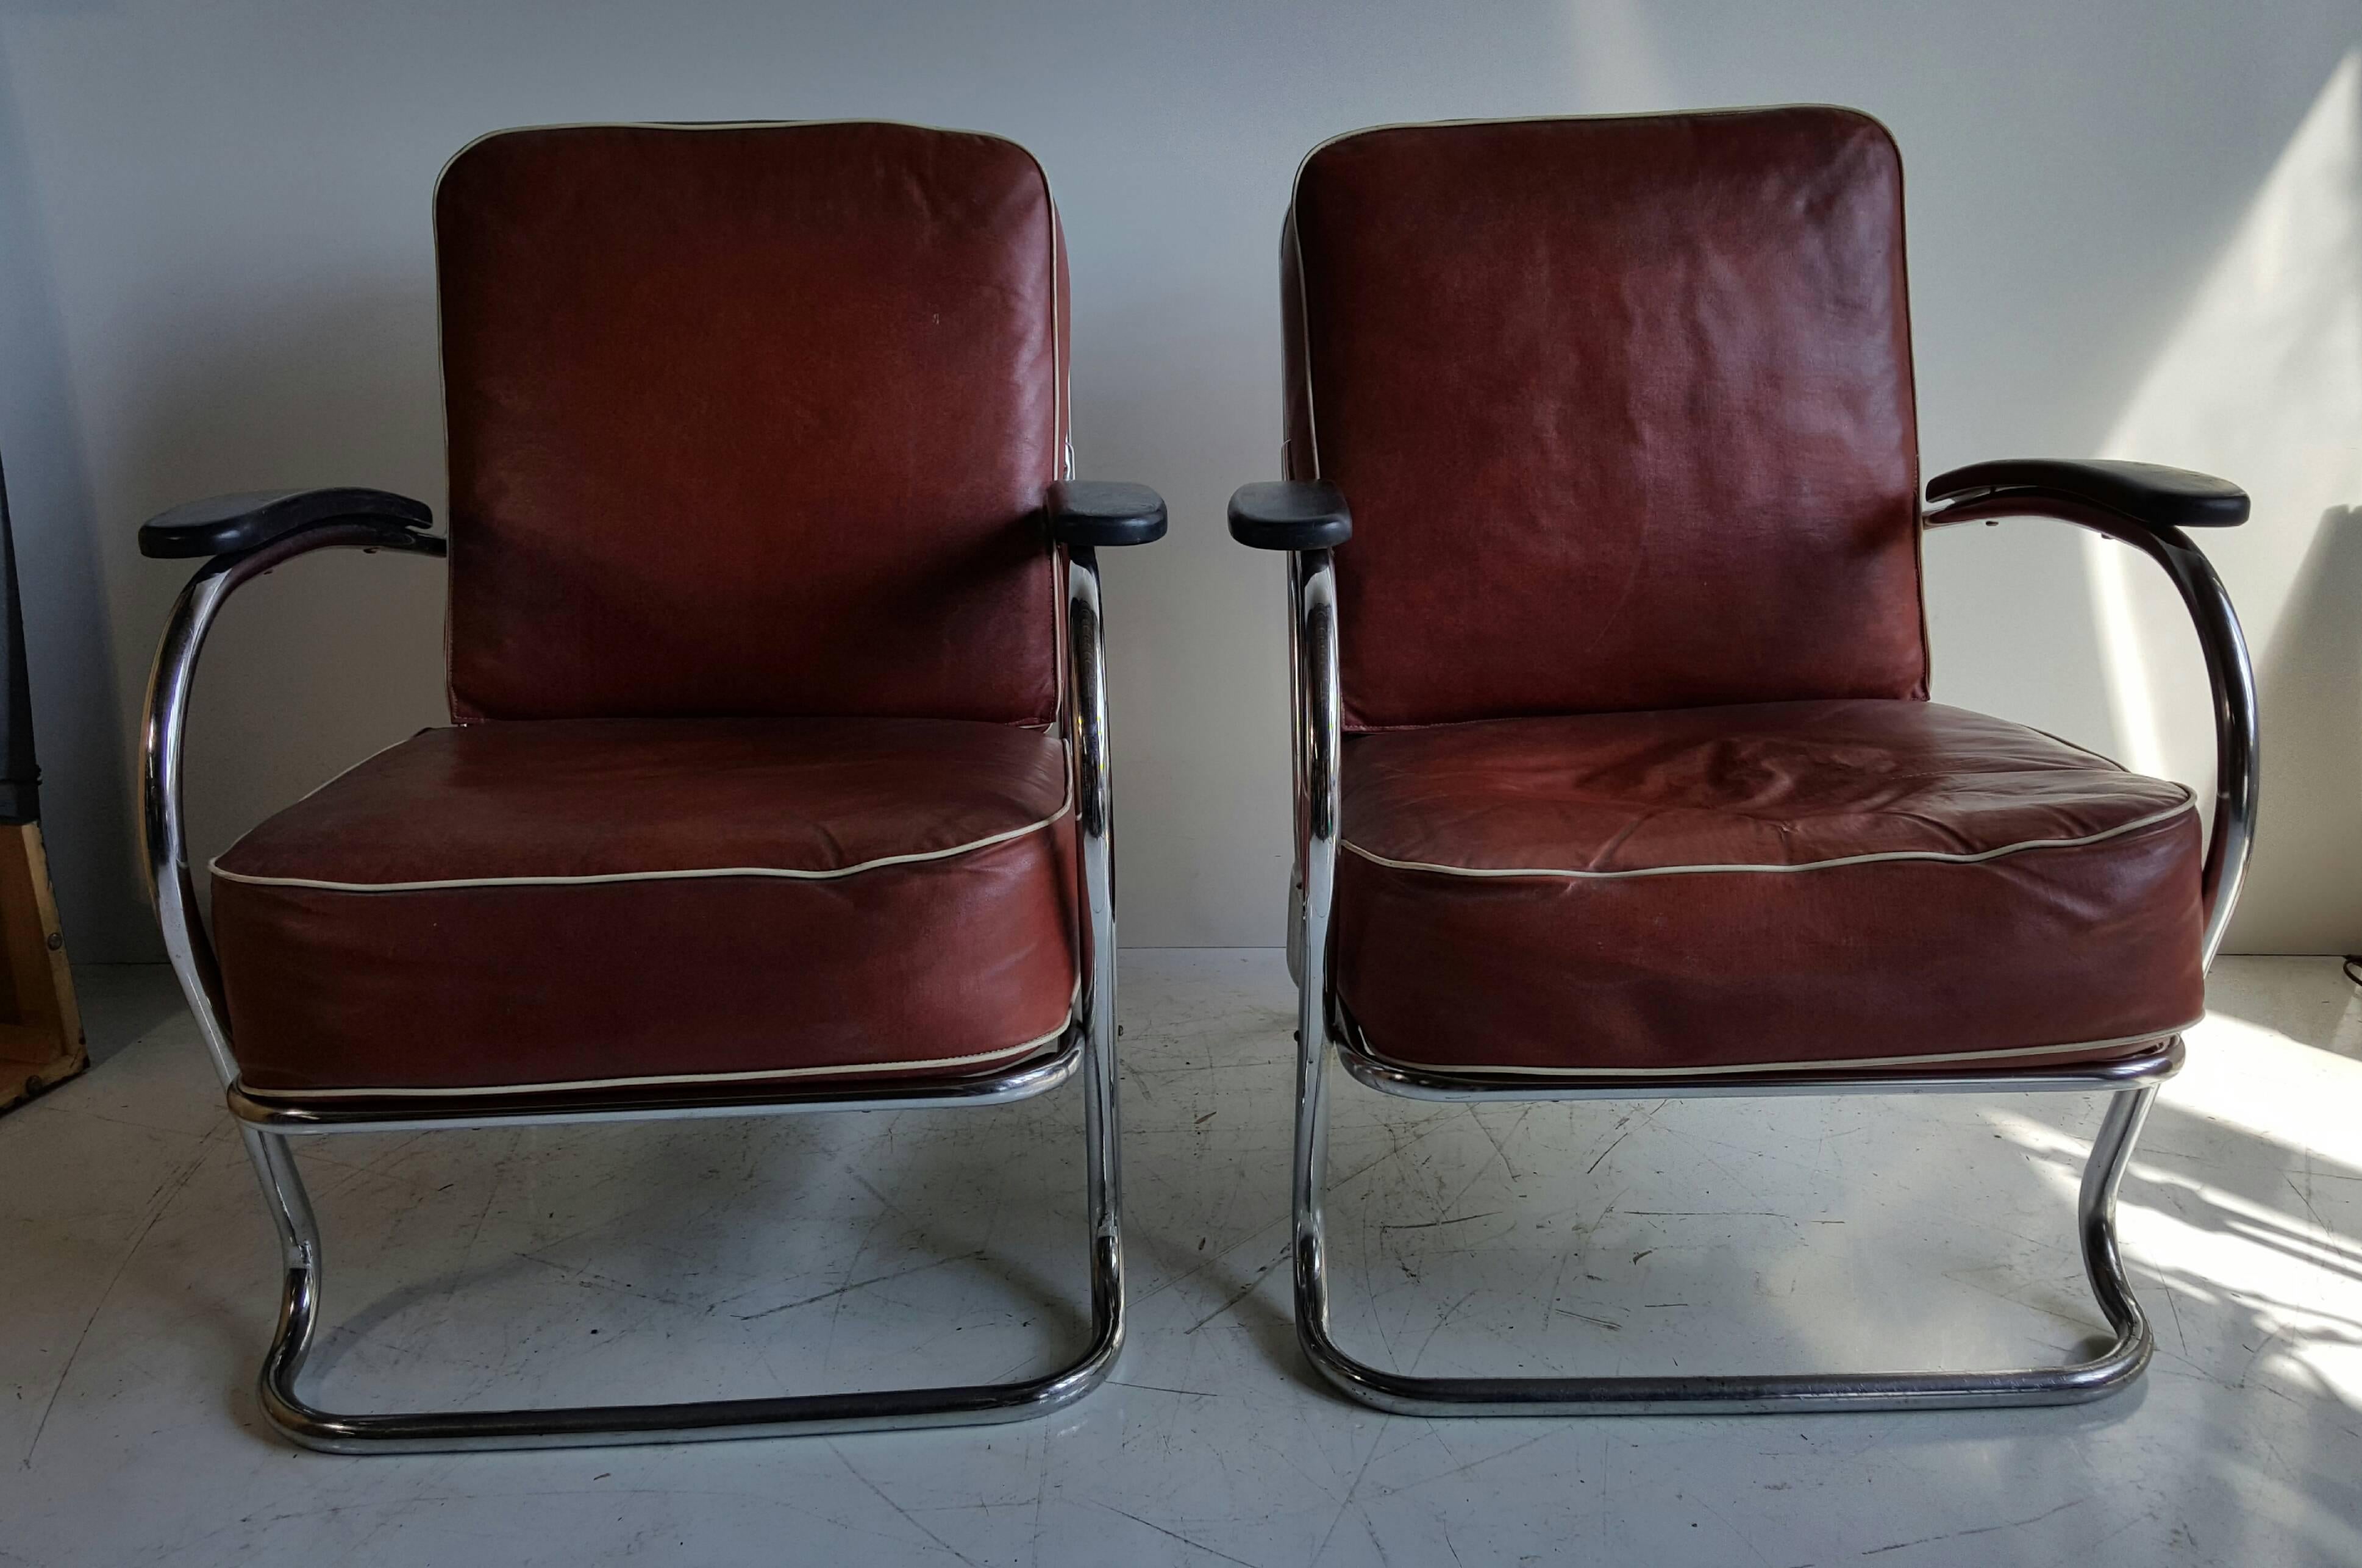 Pair of Art Deco tubular chrome lounge chairs designed by K E M Weber for Lloyd Manufacturing Co., Classic streamline design. Extremely comfortable, retains original Lloyd labels as well as oil cloth cushions, remarkably. Still in nice condition.